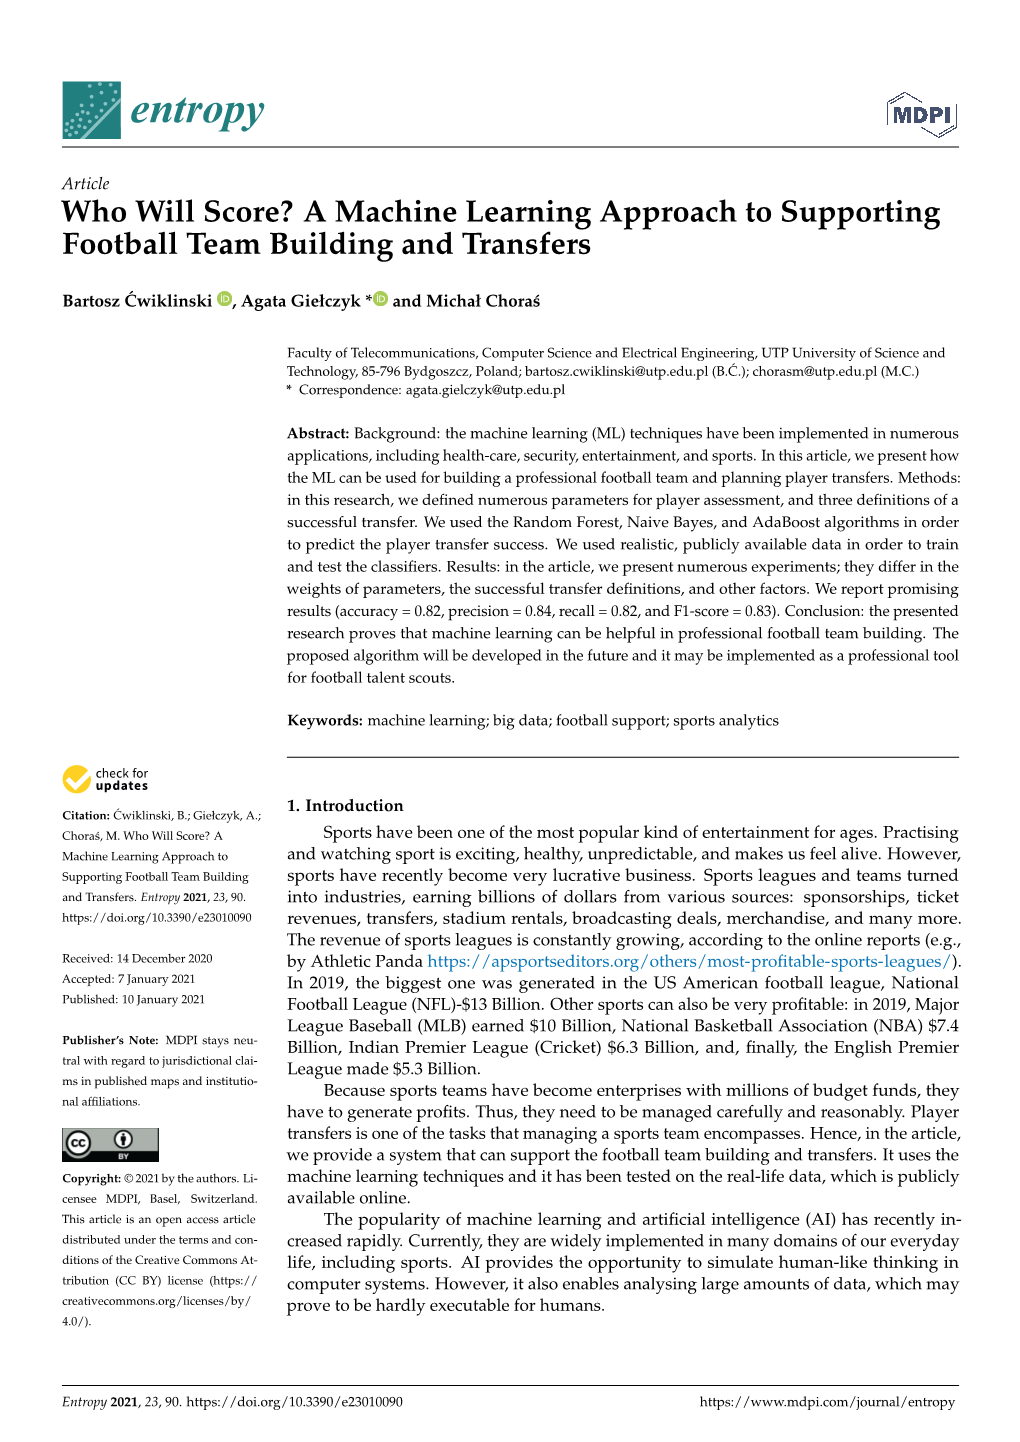 A Machine Learning Approach to Supporting Football Team Building and Transfers